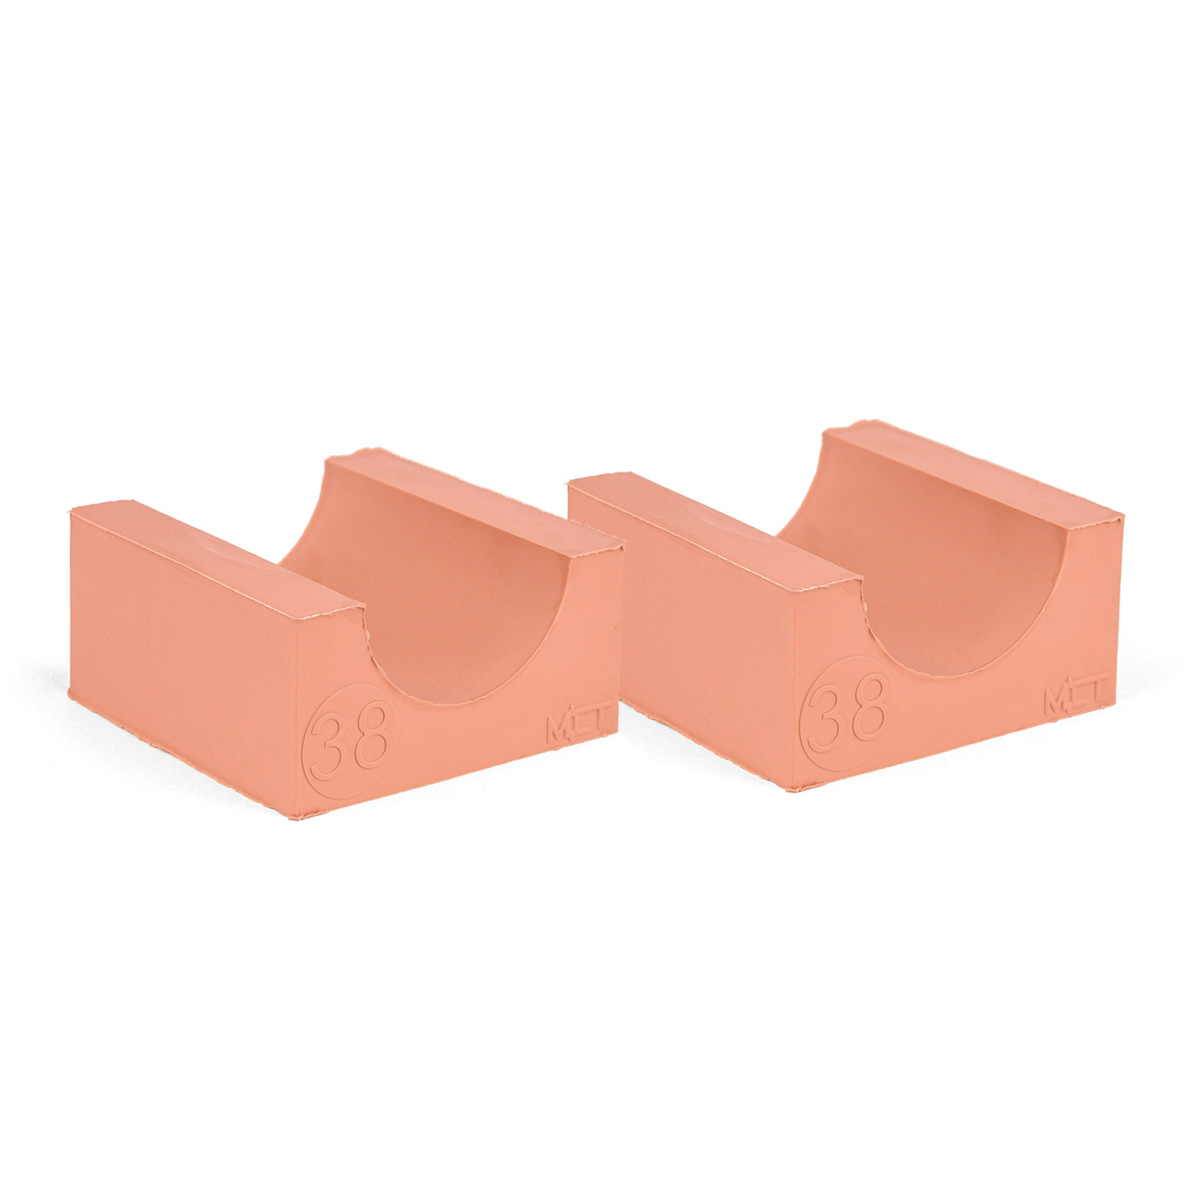 60-38*2 Set of 2 half insert block lycron, 60-38 for cable/pipe diam. 37.5-39.5mm